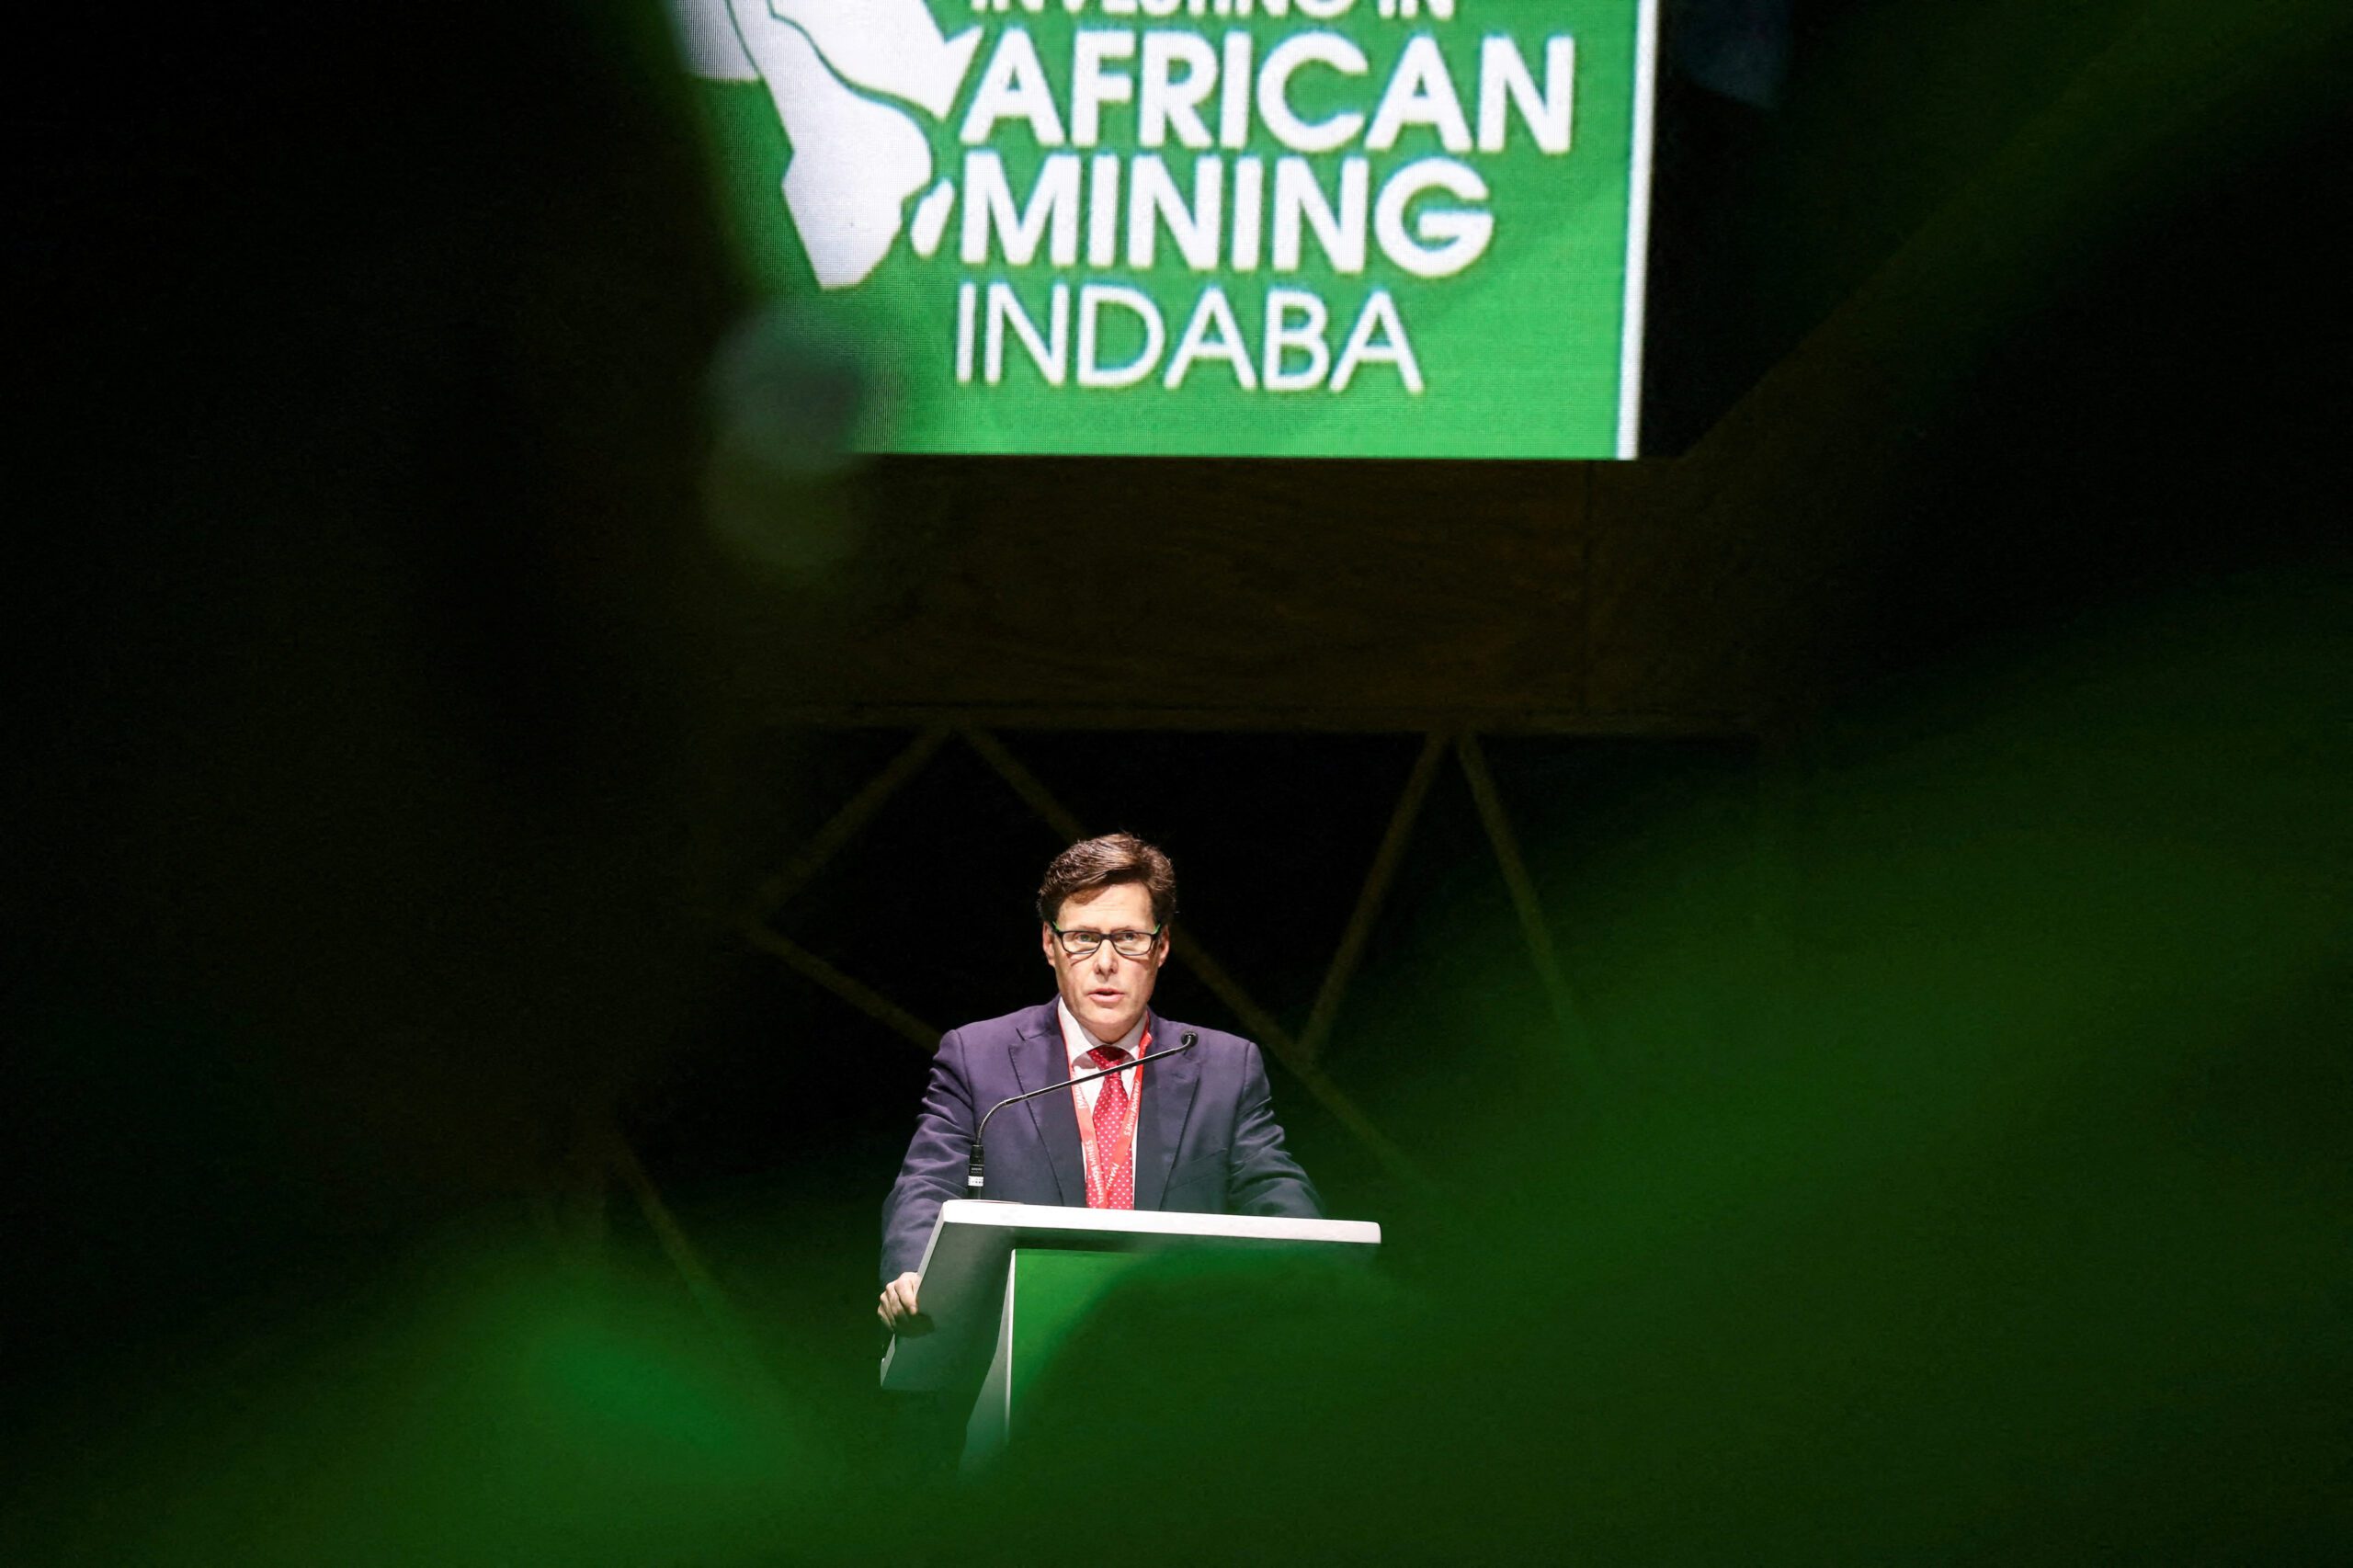 FILE PHOTO: Anglo American CEO Duncan Wanblad speaks during the Investing in African Mining Indaba 2023 conference in Cape Town, South Africa, February 6, 2023. REUTERS/Shelley Christians/File Photo